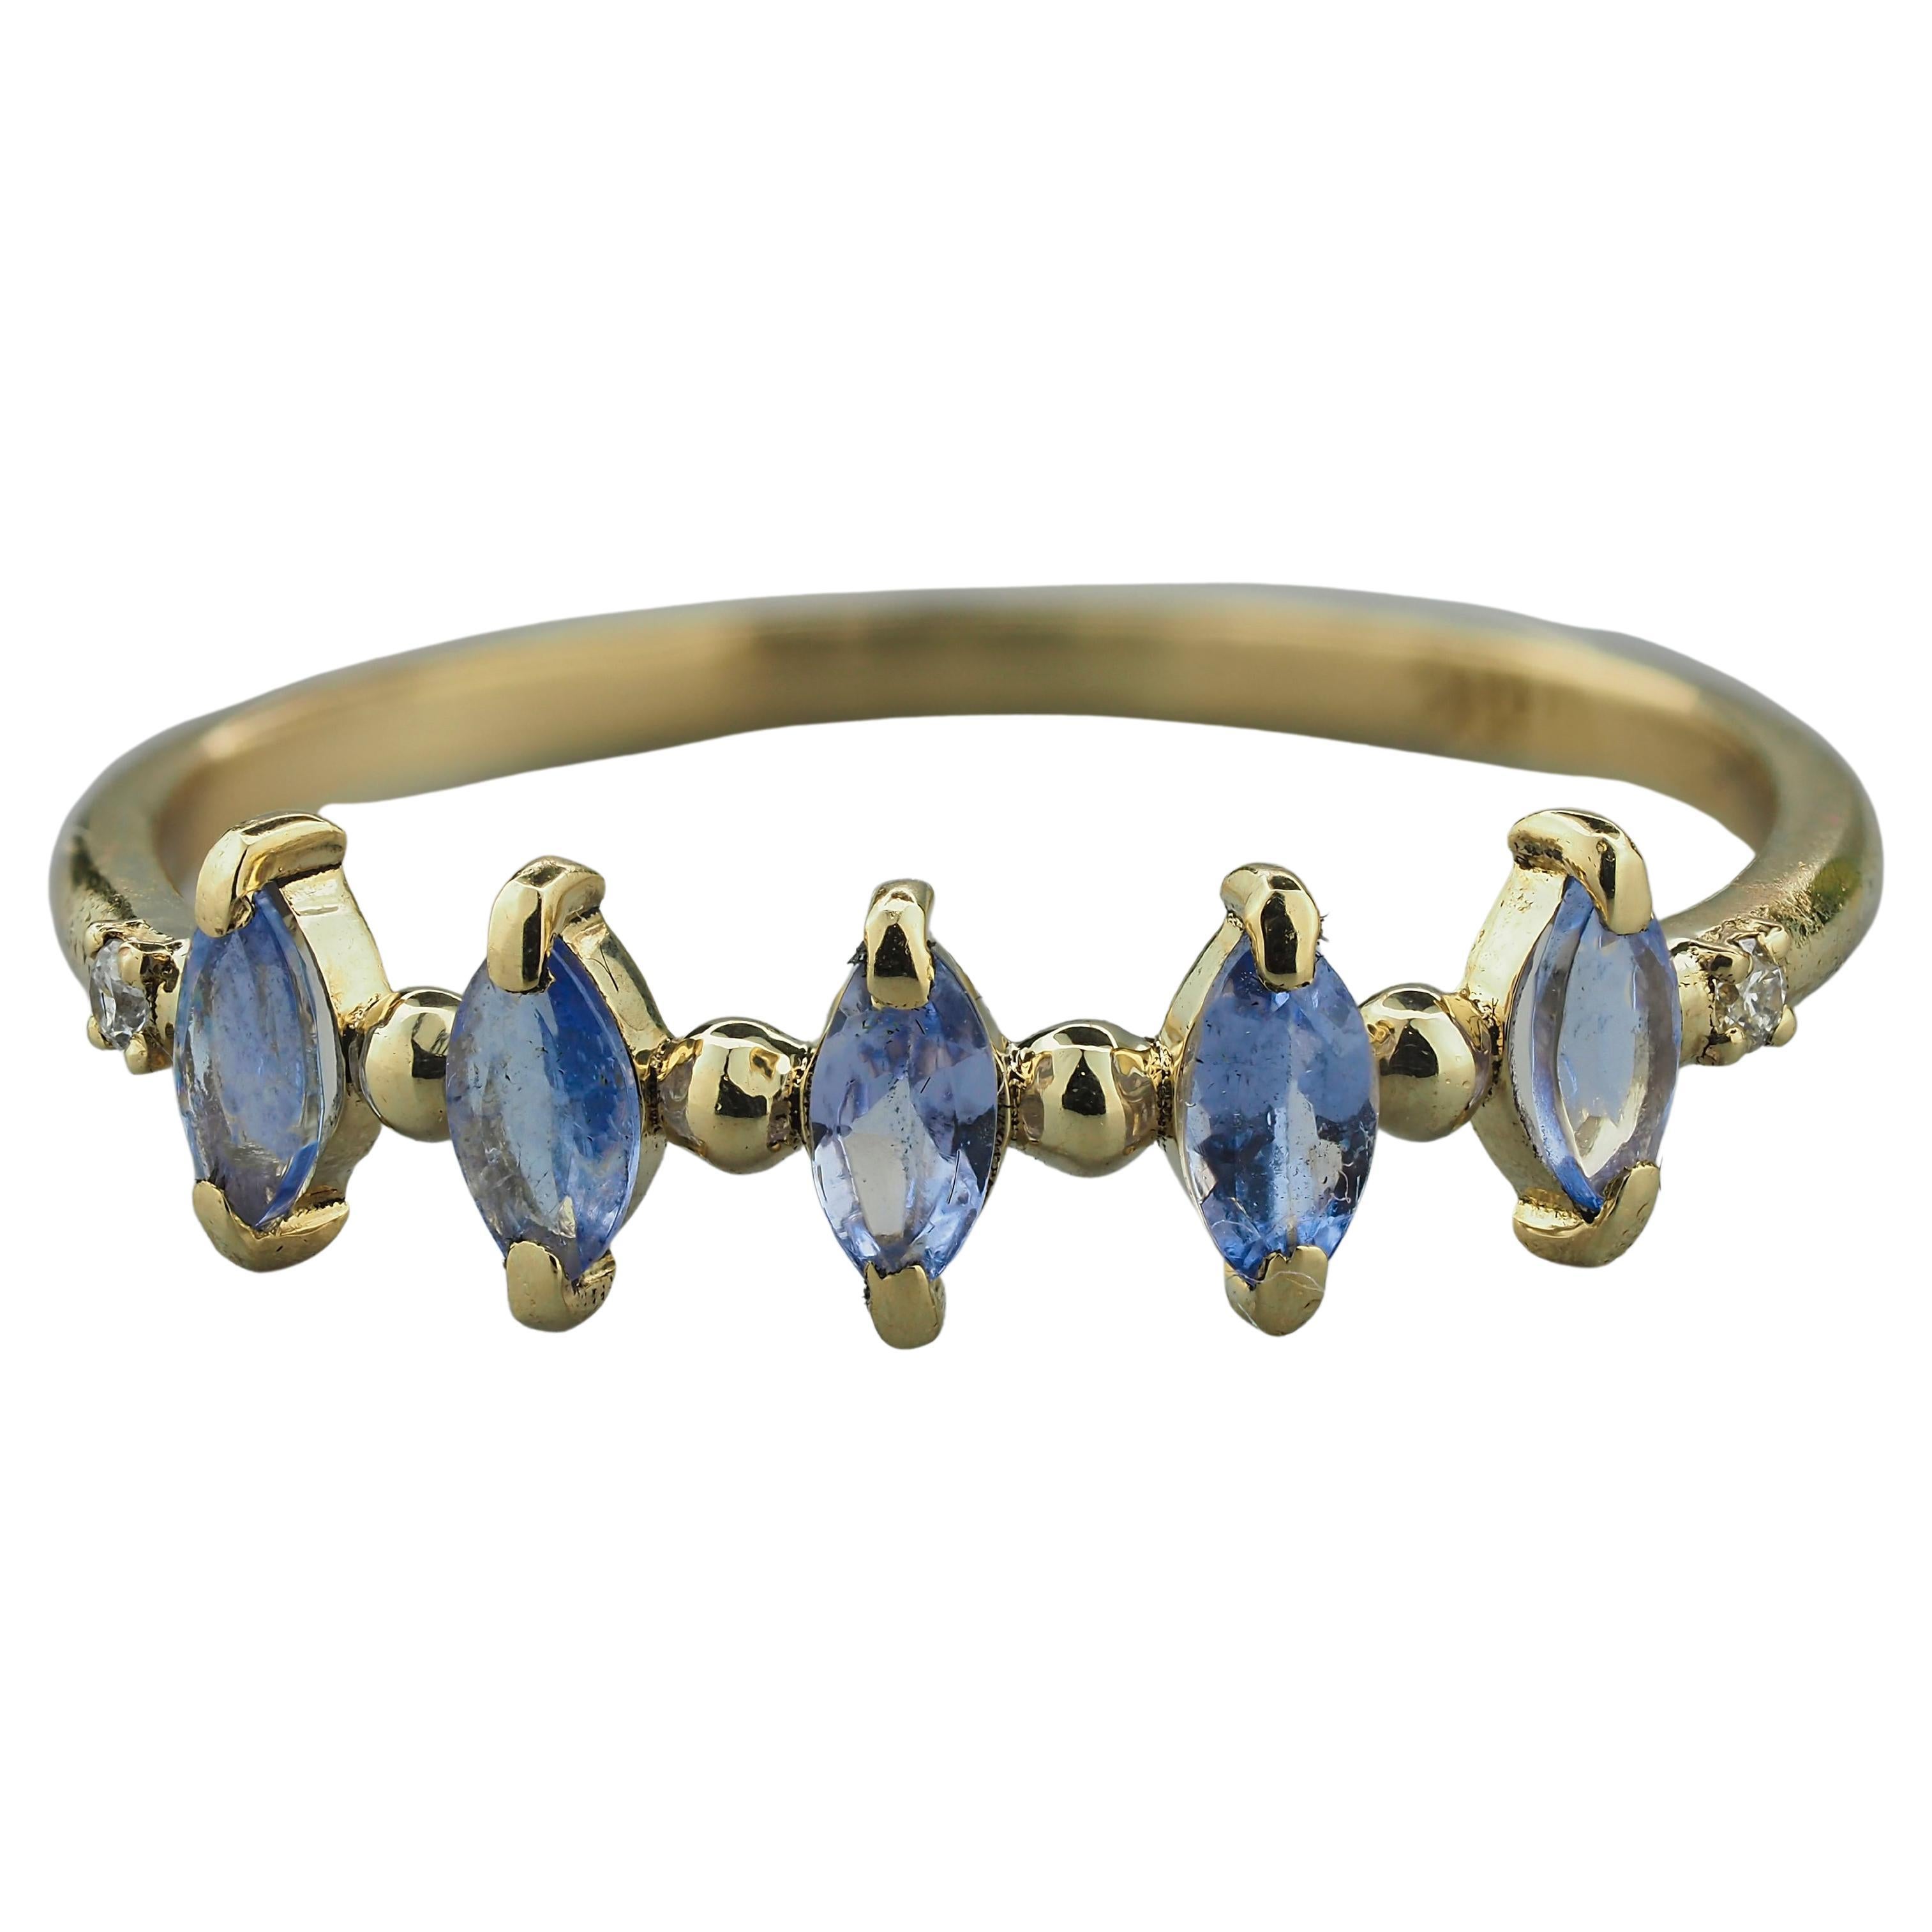 For Sale:  14k Gold Half Eternity Ring with Tanzanite and Diamonds